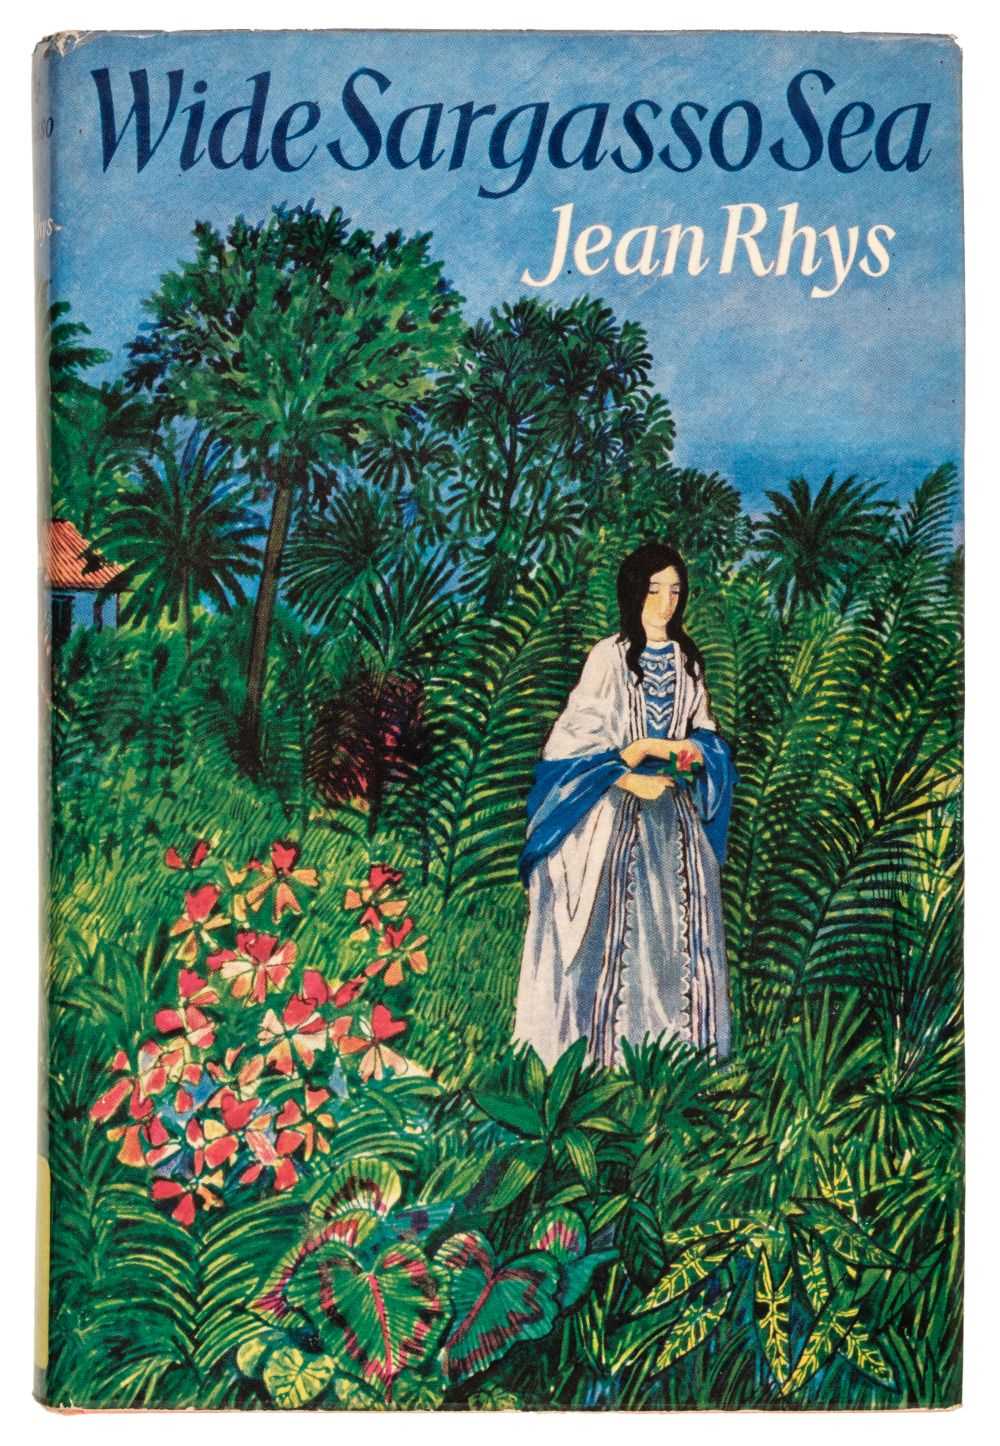 Lot 880 - Rhys (Jean). Wide Sargasso Sea, 1st edition, 1966